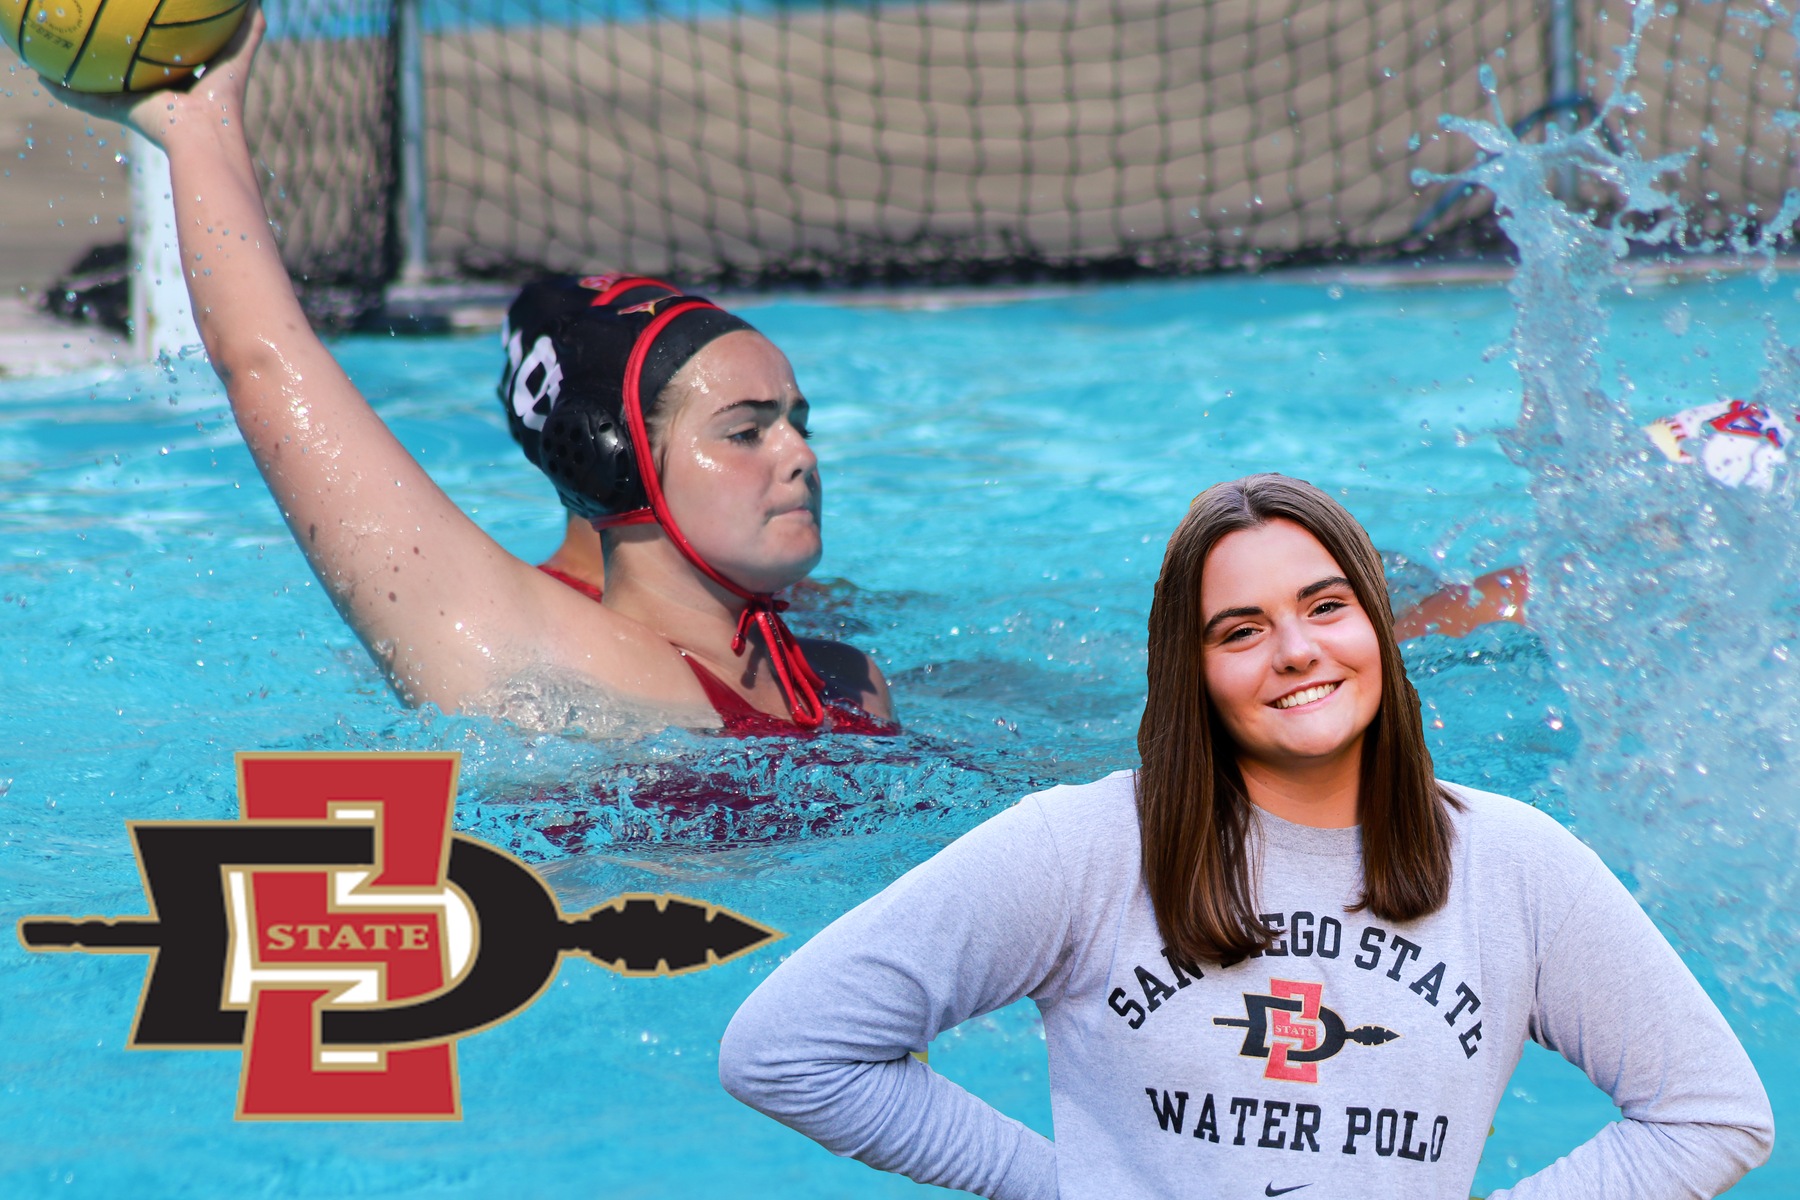 Wilkins to Play Water Polo at San Diego State